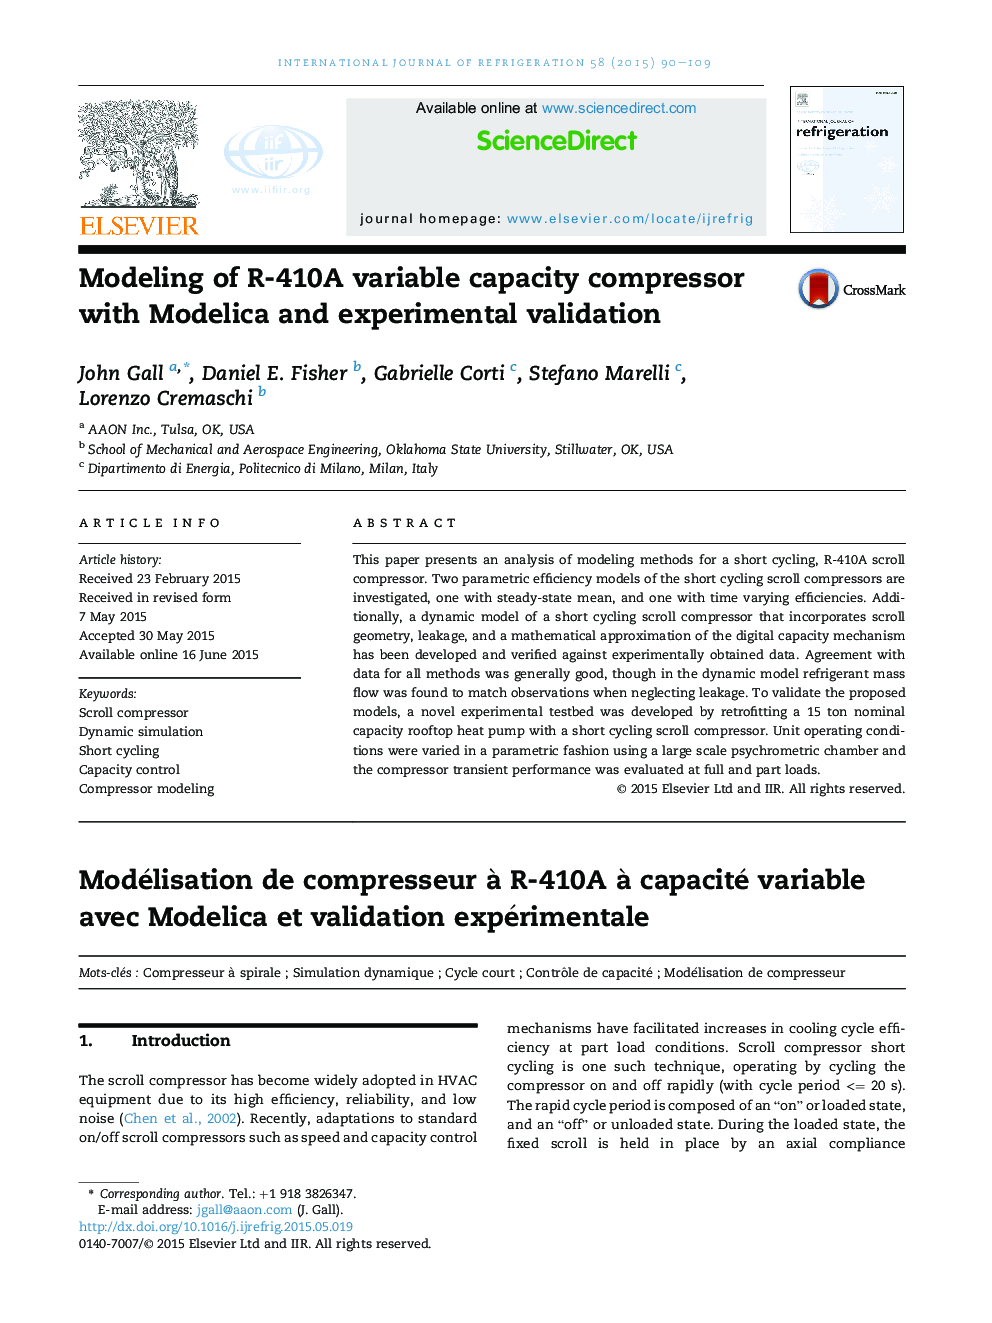 Modeling of R-410A variable capacity compressor with Modelica and experimental validation